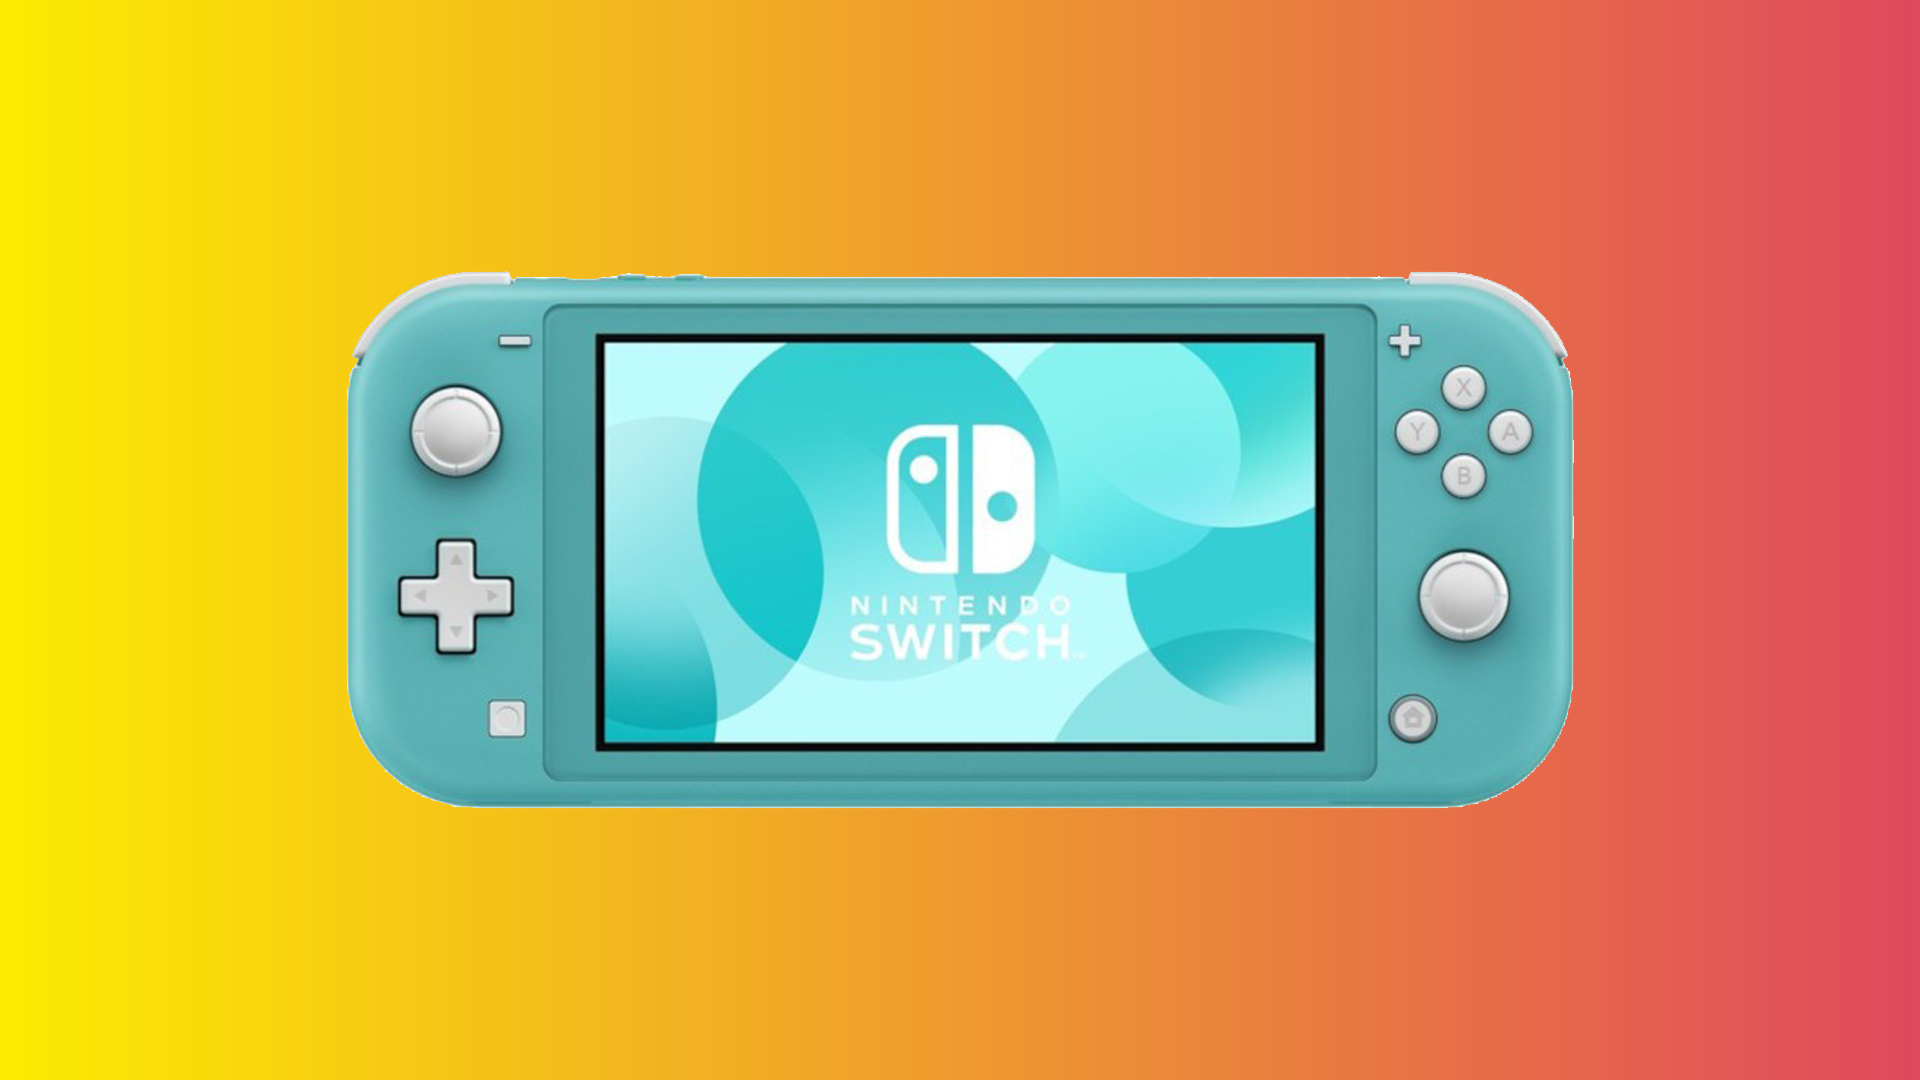 Nintendo Switch Lite on a multi-coloured background.